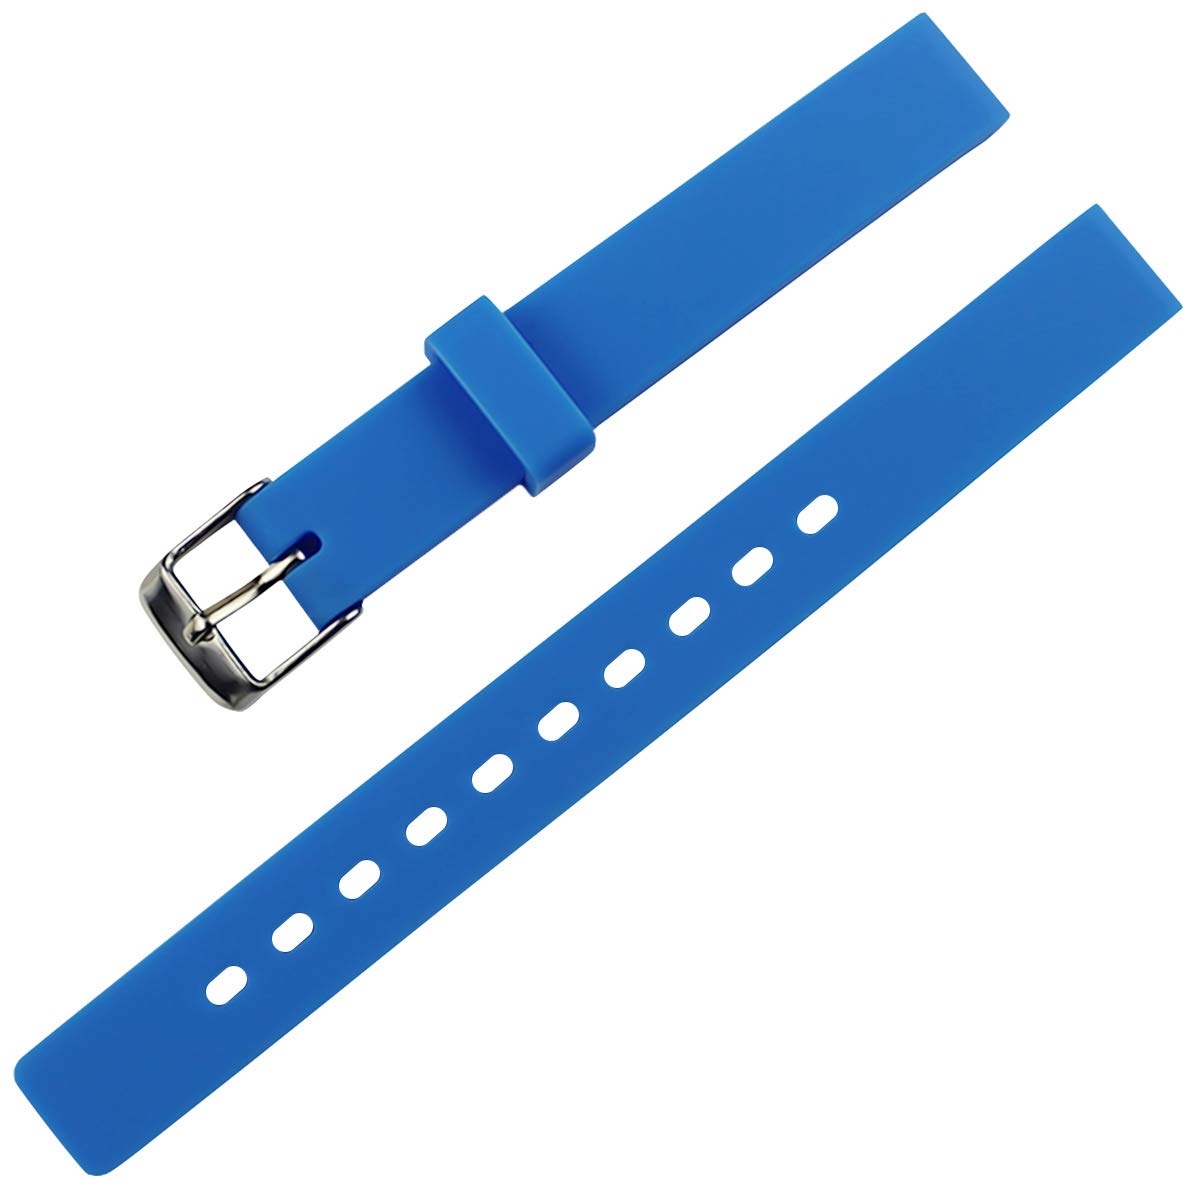 KHZBS Children's Candy Color Silicone Watch Band Waterproof Rubber Strap 12mm